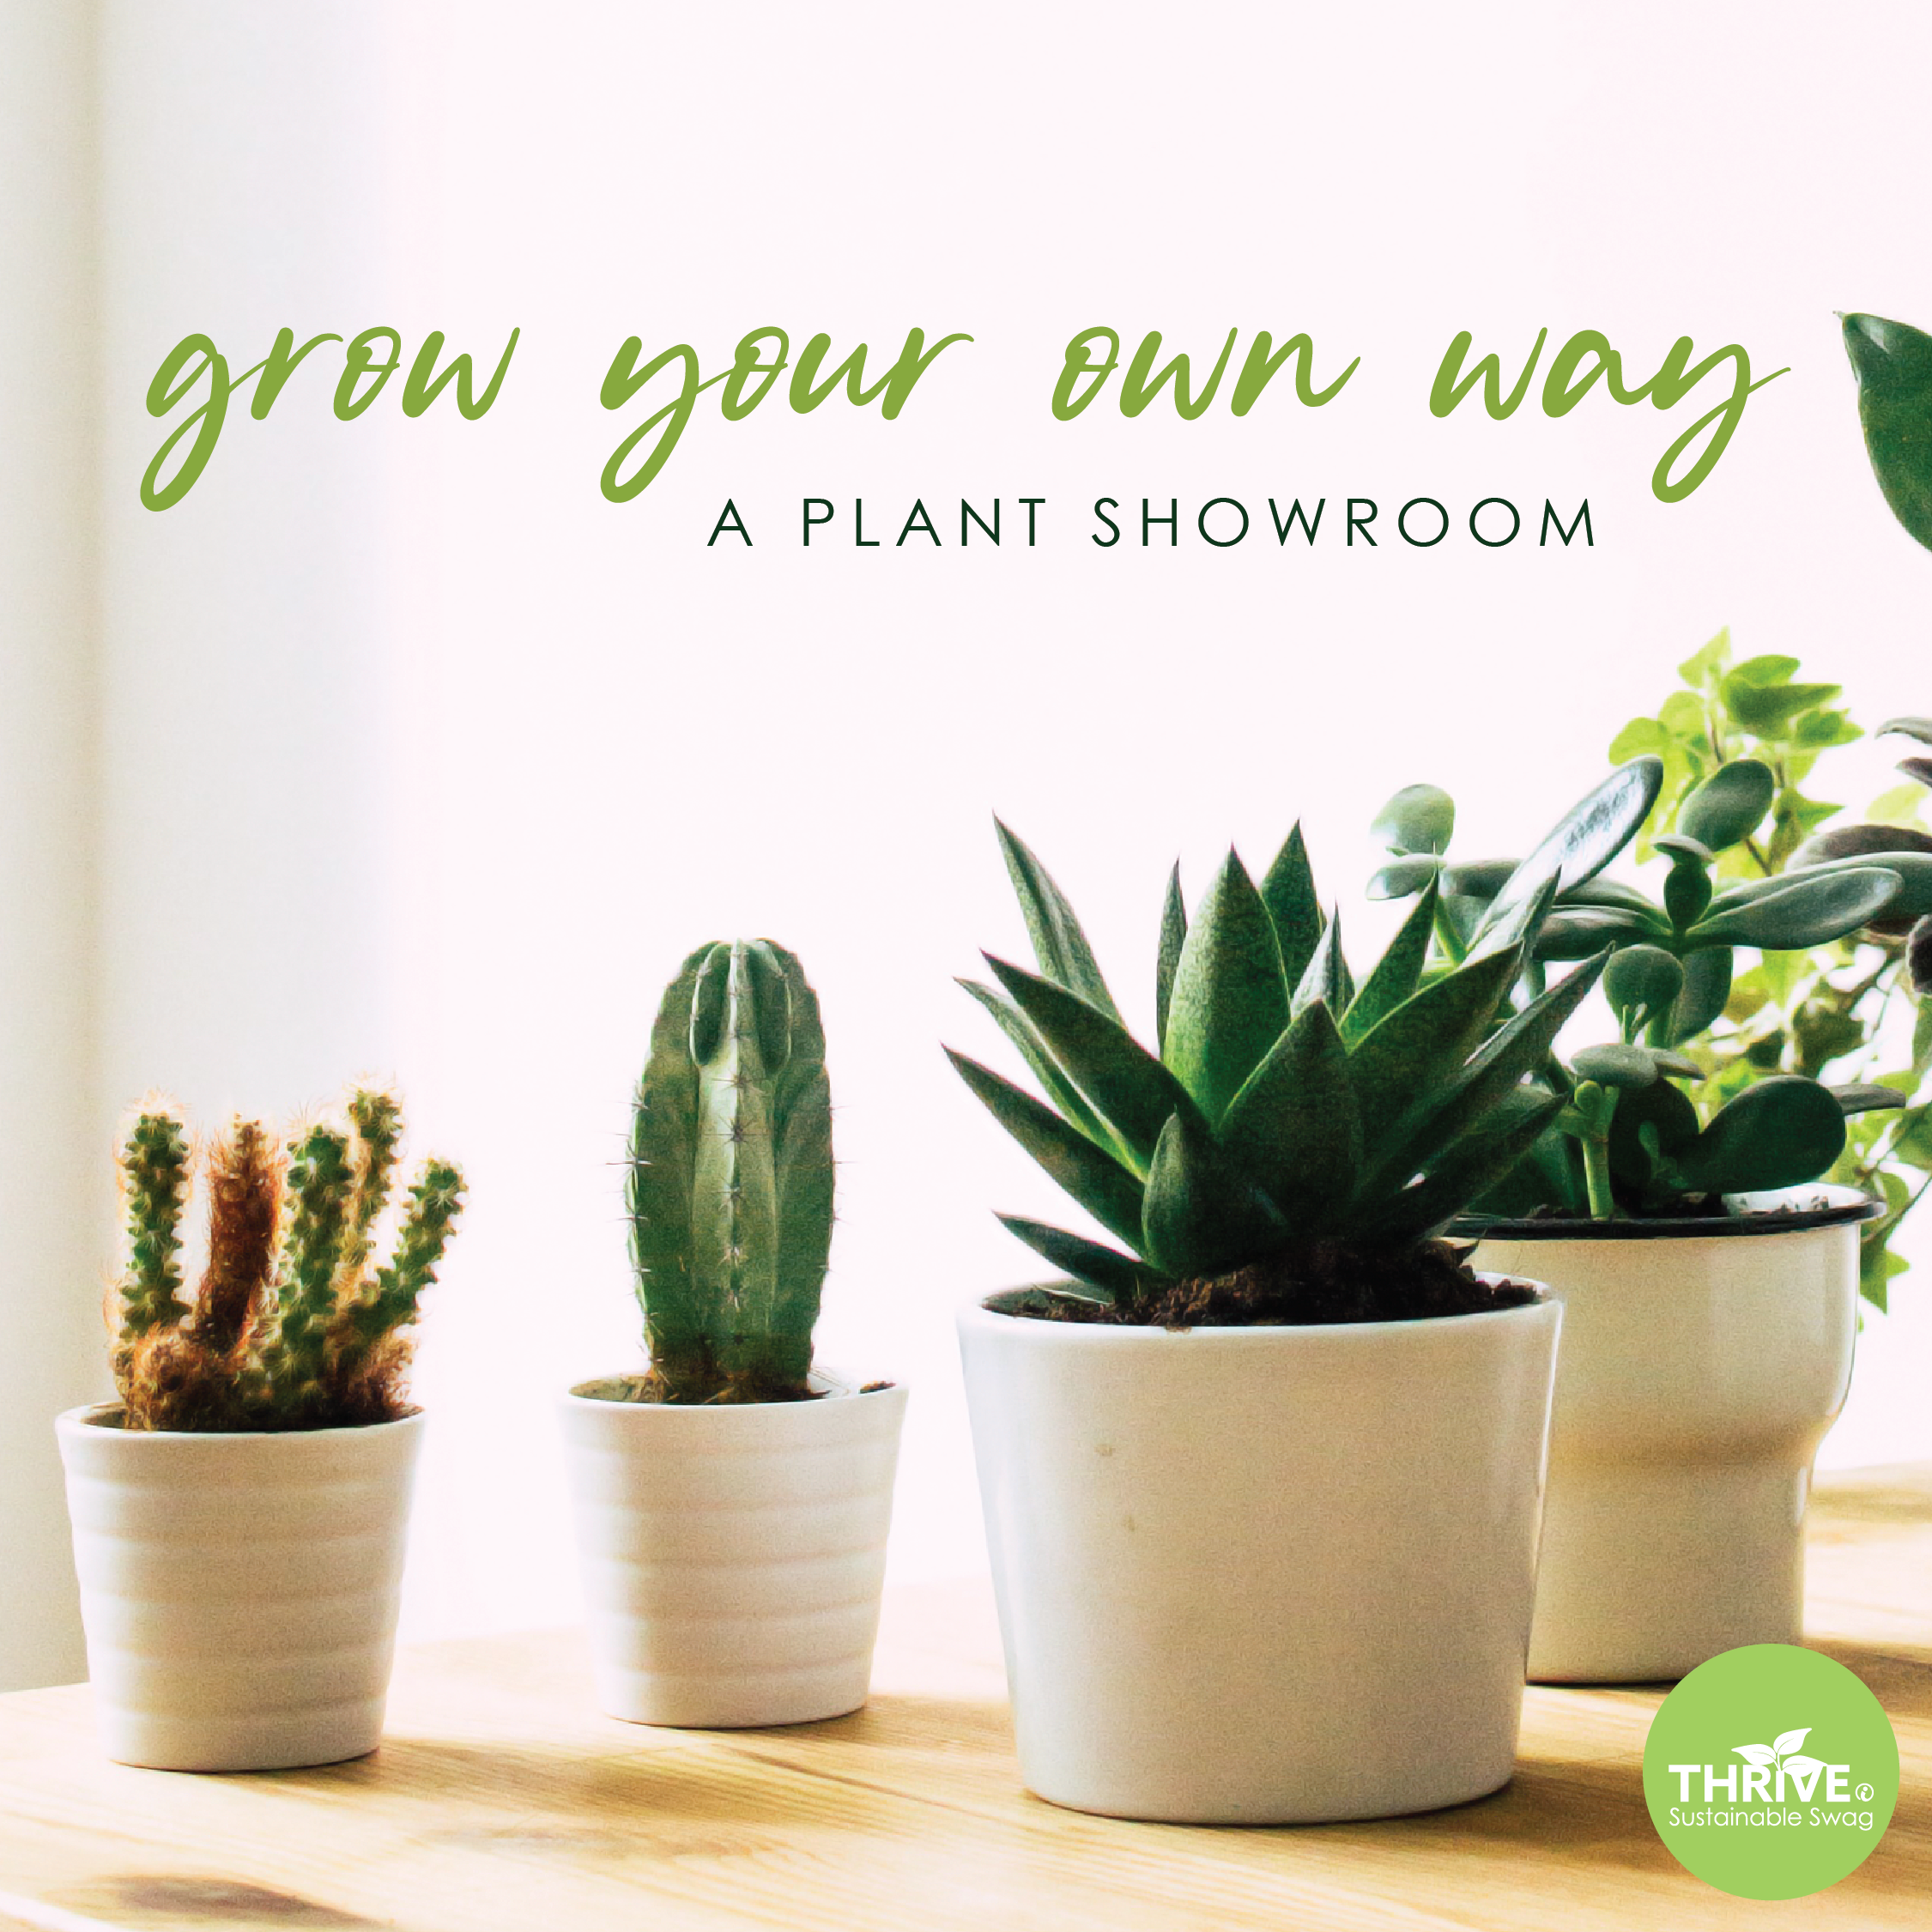 Image of four small potted succulents sitting on a wooden table with text that says Grow Your Own Way, a Plant Showroom.